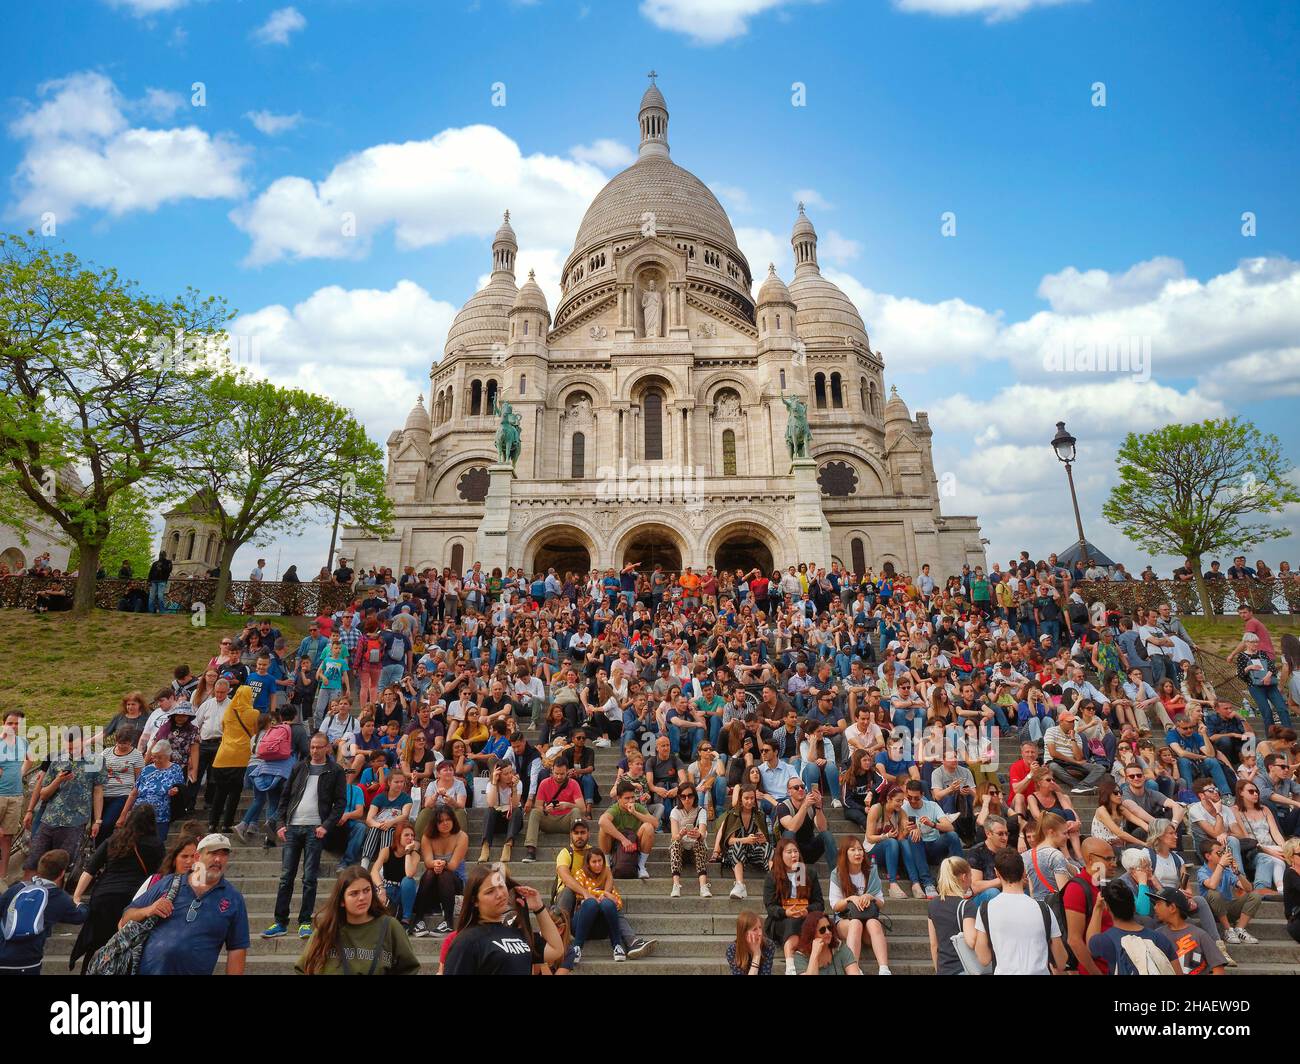 Paris, France - April 2019: Sacre Coeur Basilica Sacred Heart in Paris full of people crowded Stock Photo